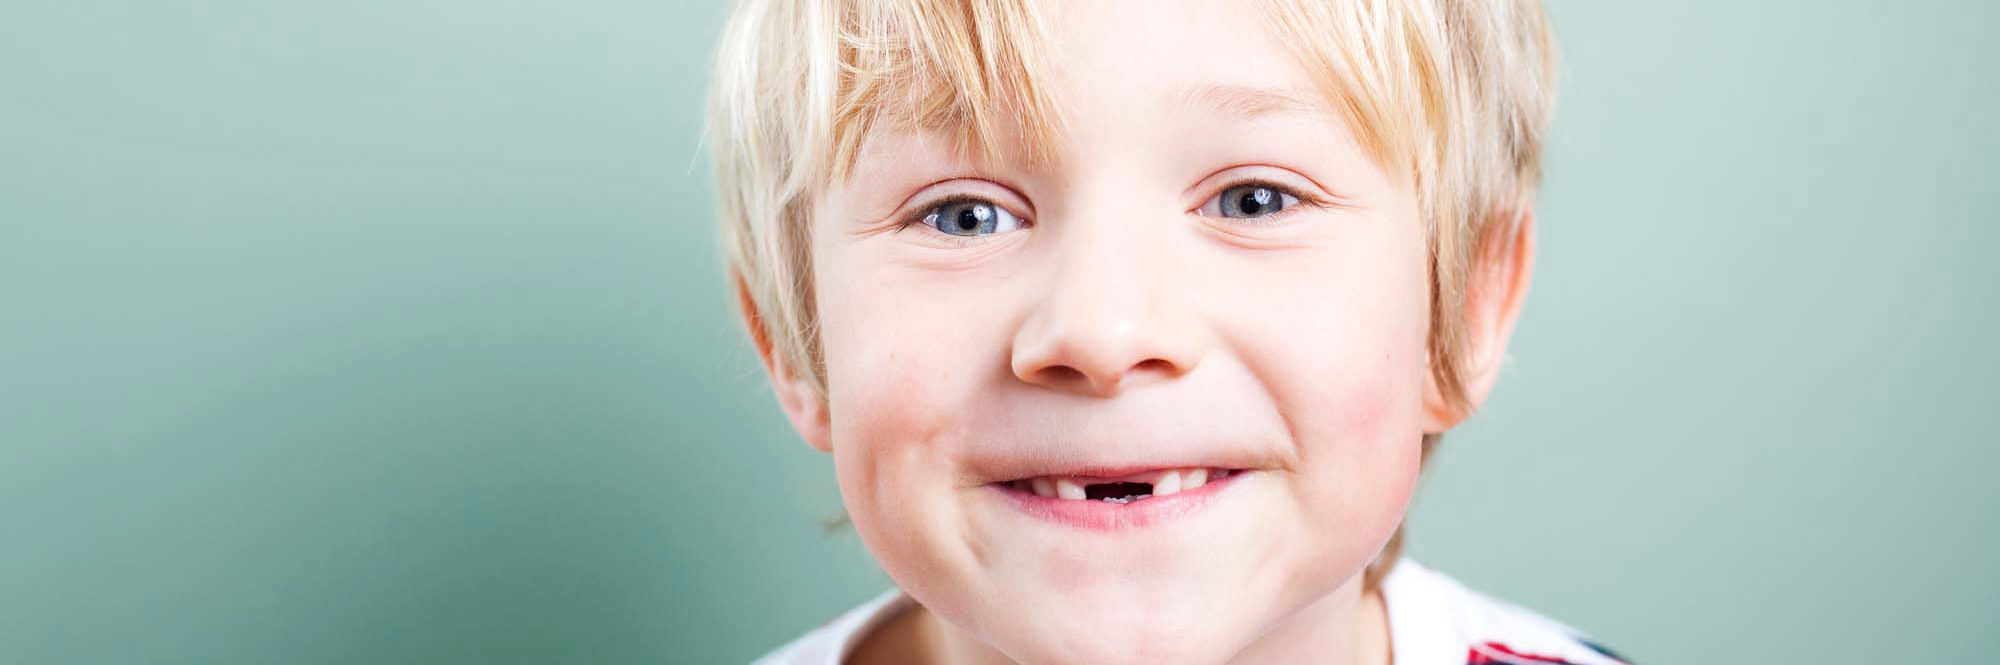 6-7 Years, 8-9 Years, Babies And Children, Blond Hair, Blue, Brightly Lit, Casual, Cheerful, Cheesy Grin, Child, Close-up, Copy Space, Cute, Elementary Age, Excitement, Gap, Happiness, Head And Shoulders, Horizontal, Human Teeth, Innocence, Isolated, Isolated Objects, Isolated On Blue, Lifestyle, Little Boys, Looking At Camera, Nerd, One Person, People, People, Portrait, Real People, Smiling, Toothless Smile, Turquoise